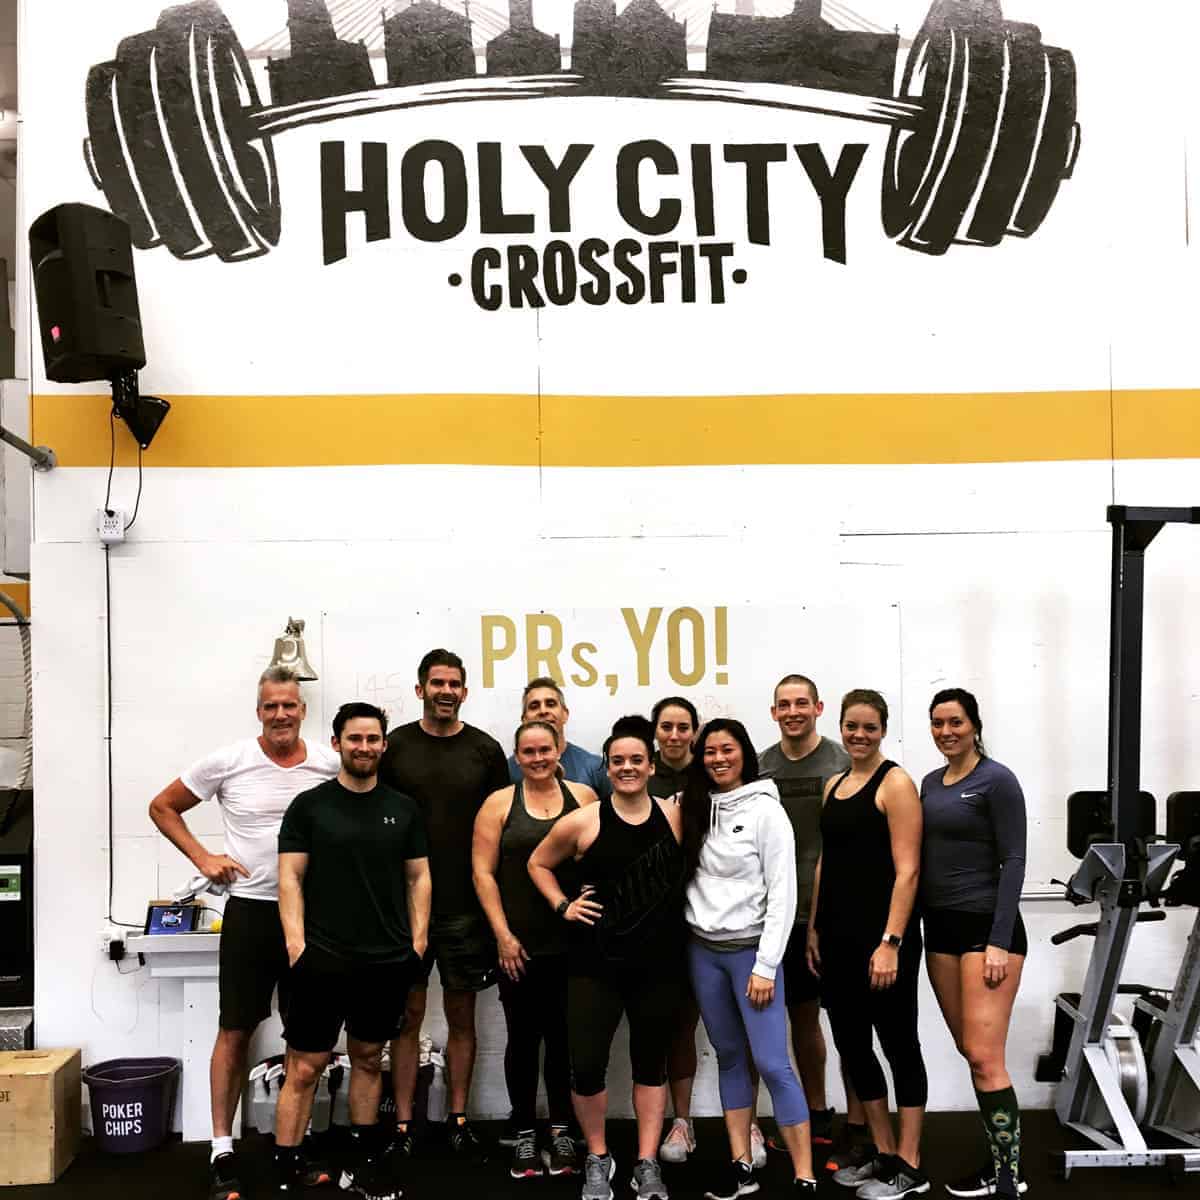 group of people smiling in a gym